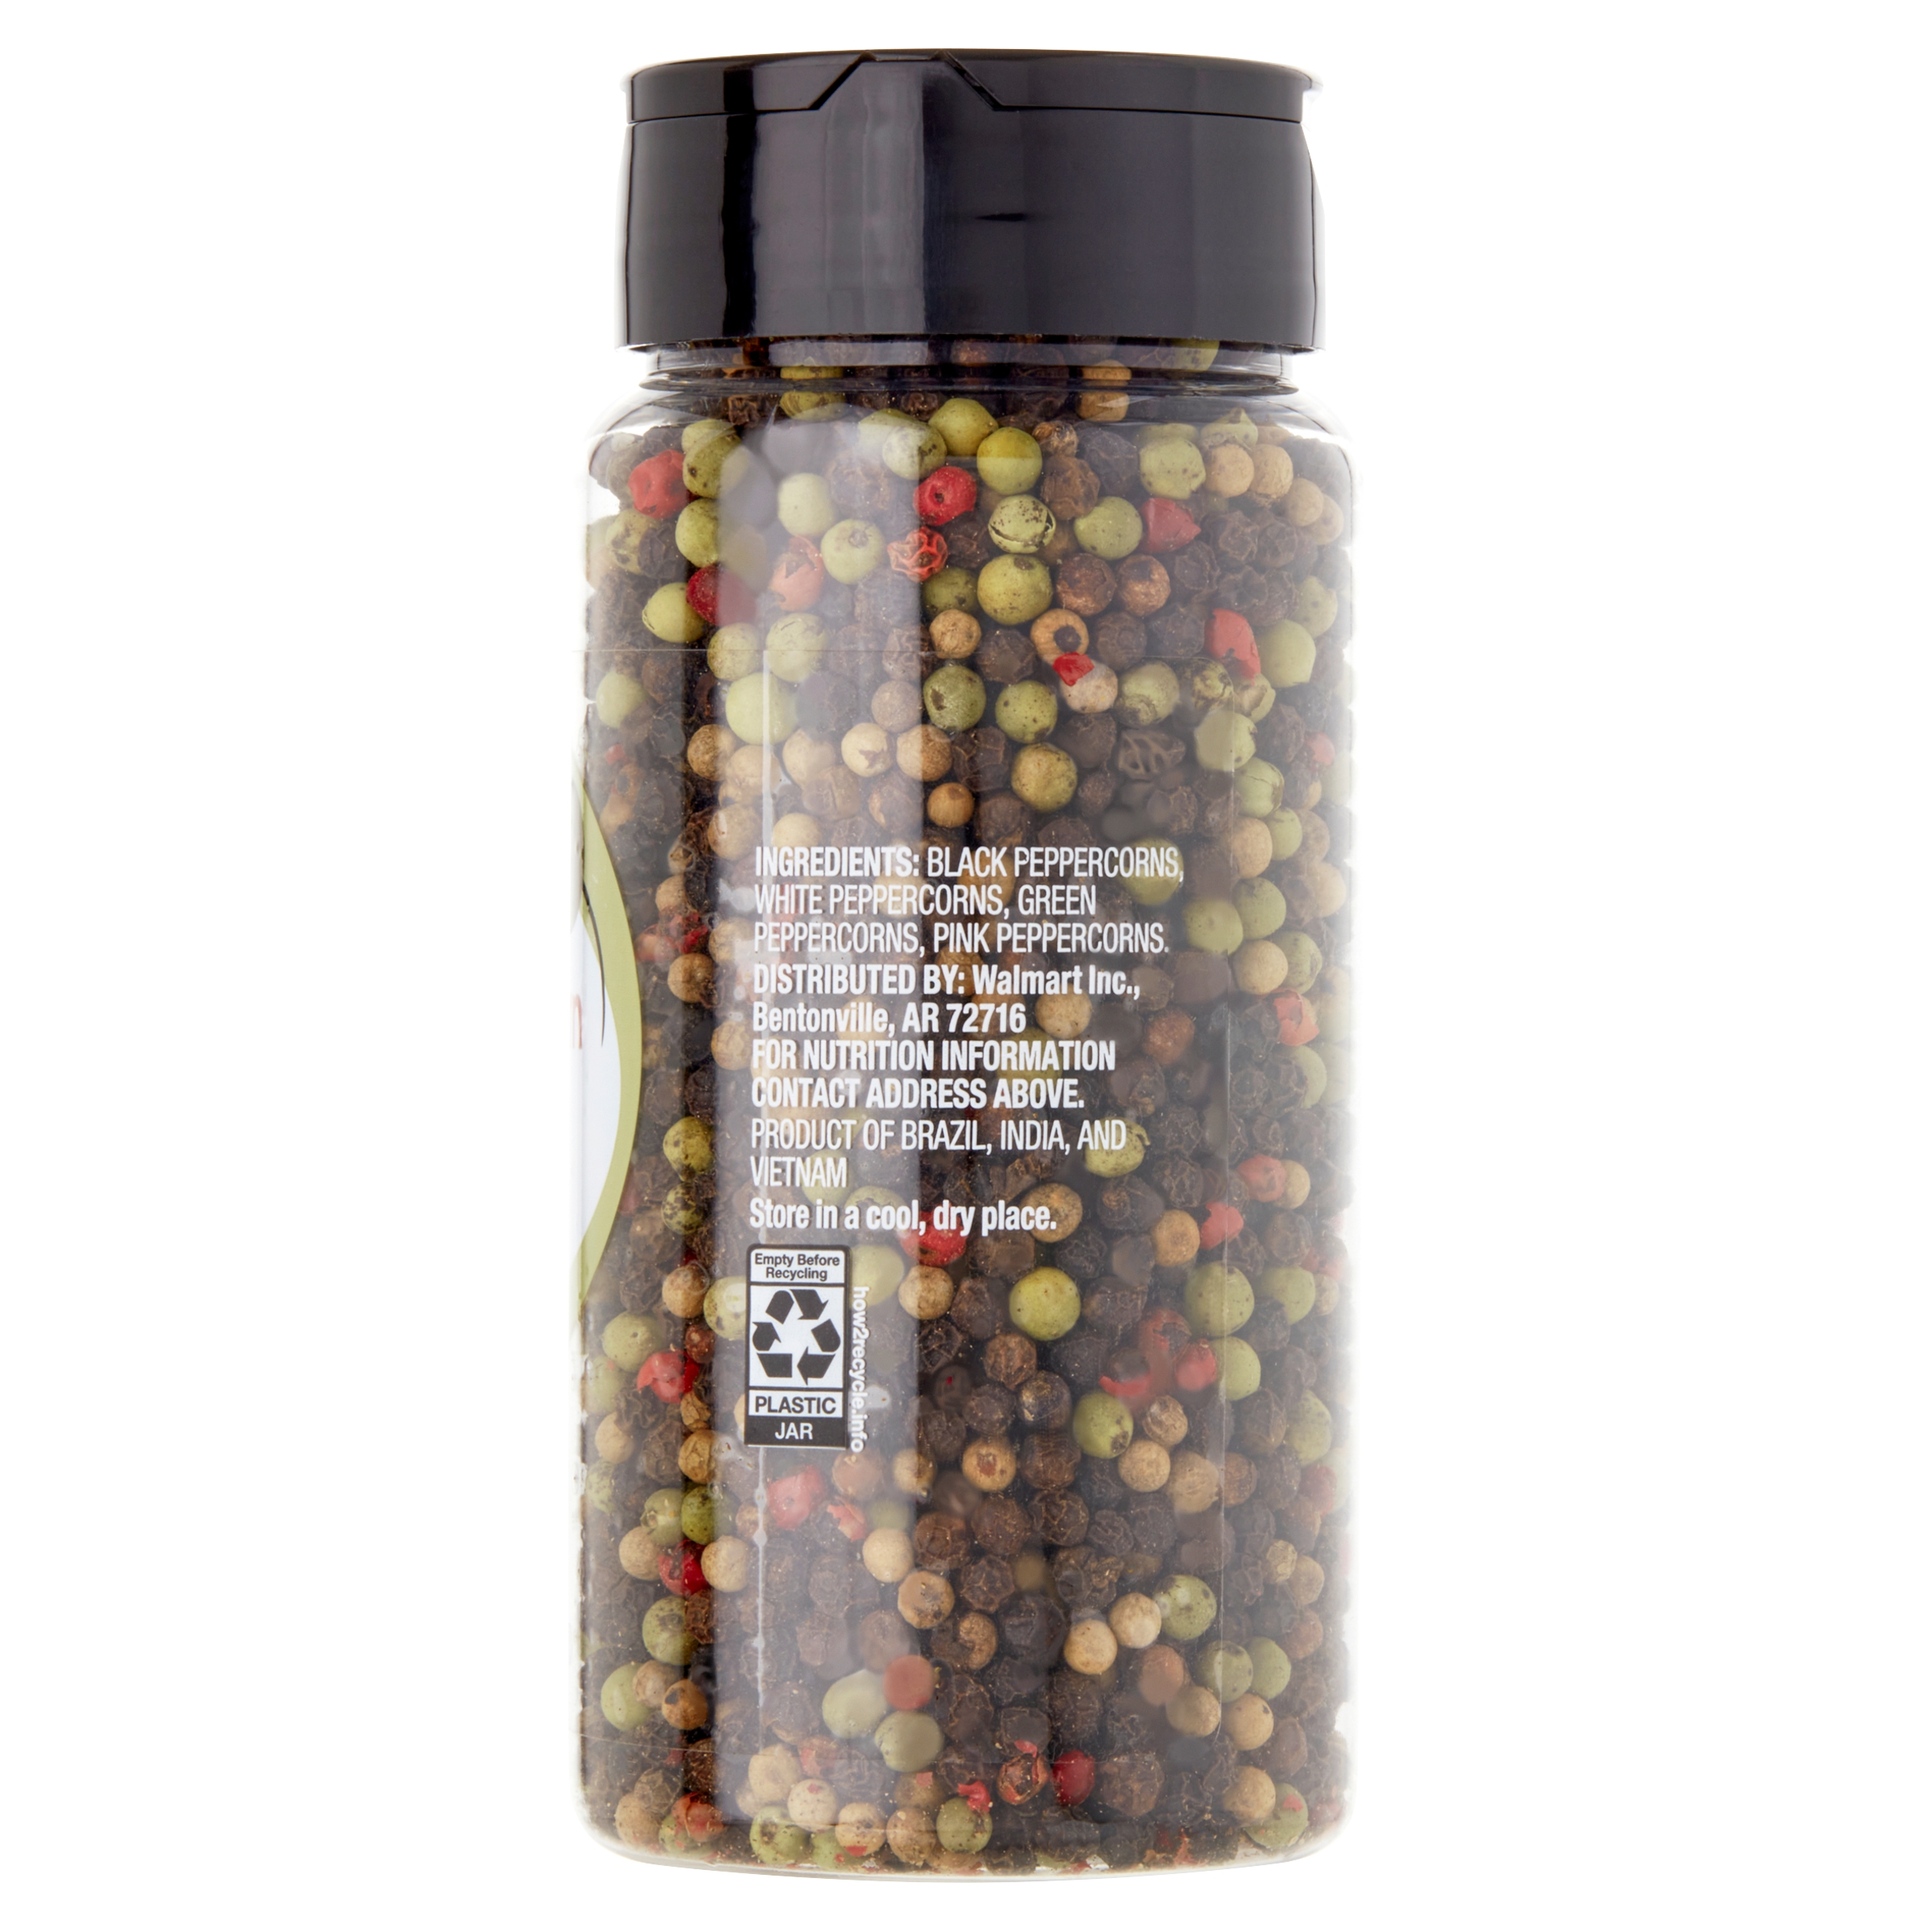 Great Value Peppercorn Medley Grinder Refill, 5.3 oz - image 5 of 7